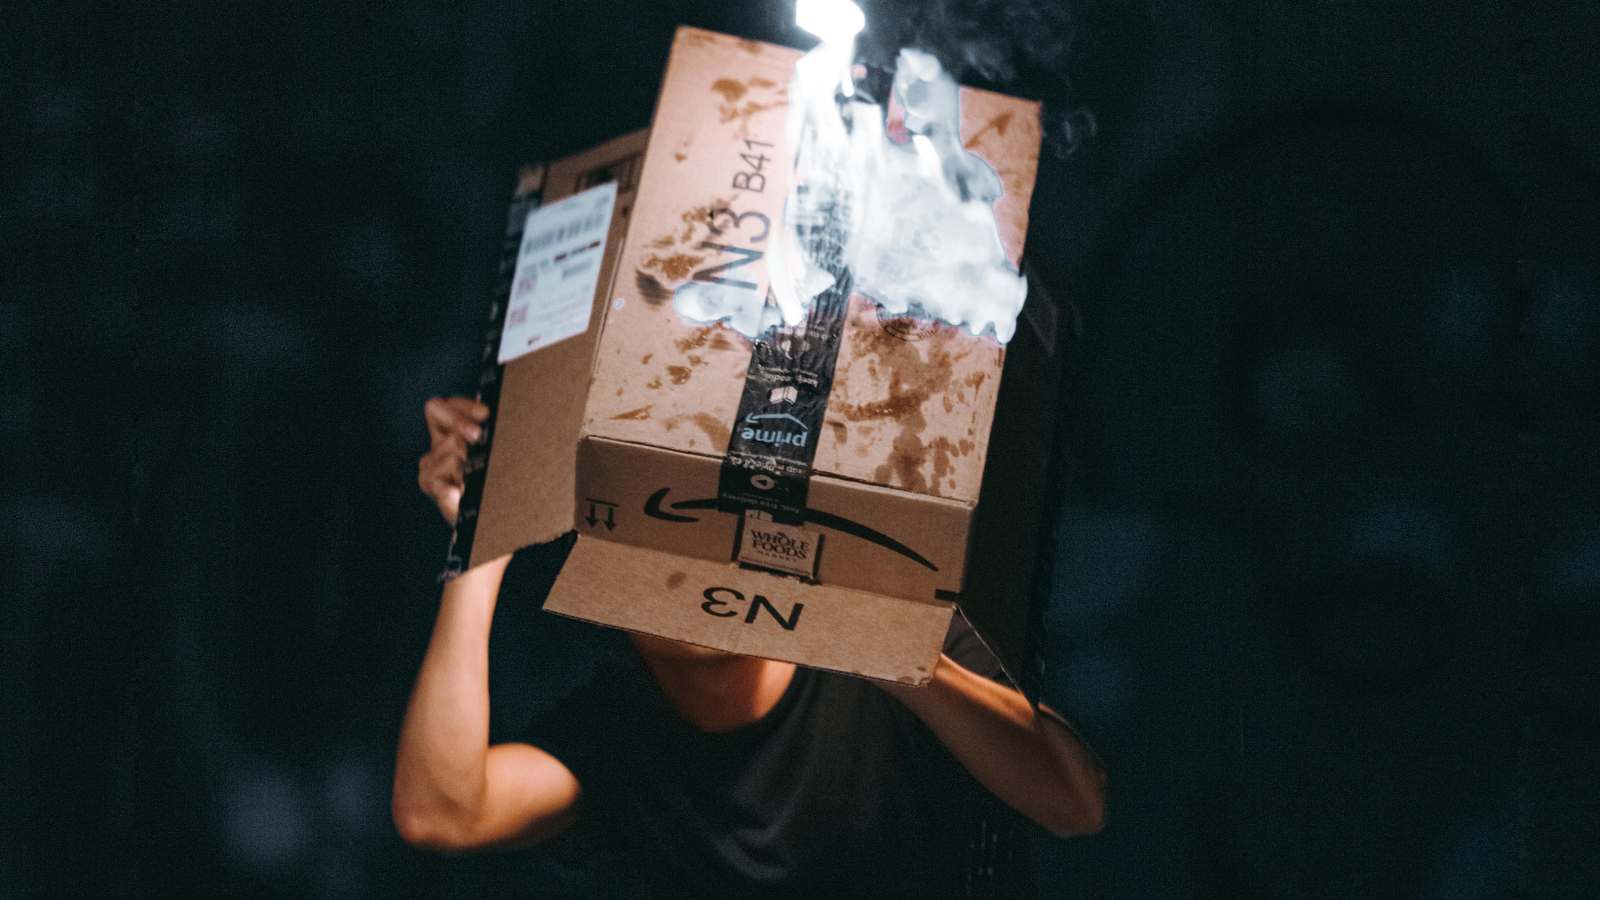 A person looking inside a damaged Amazon shipping box